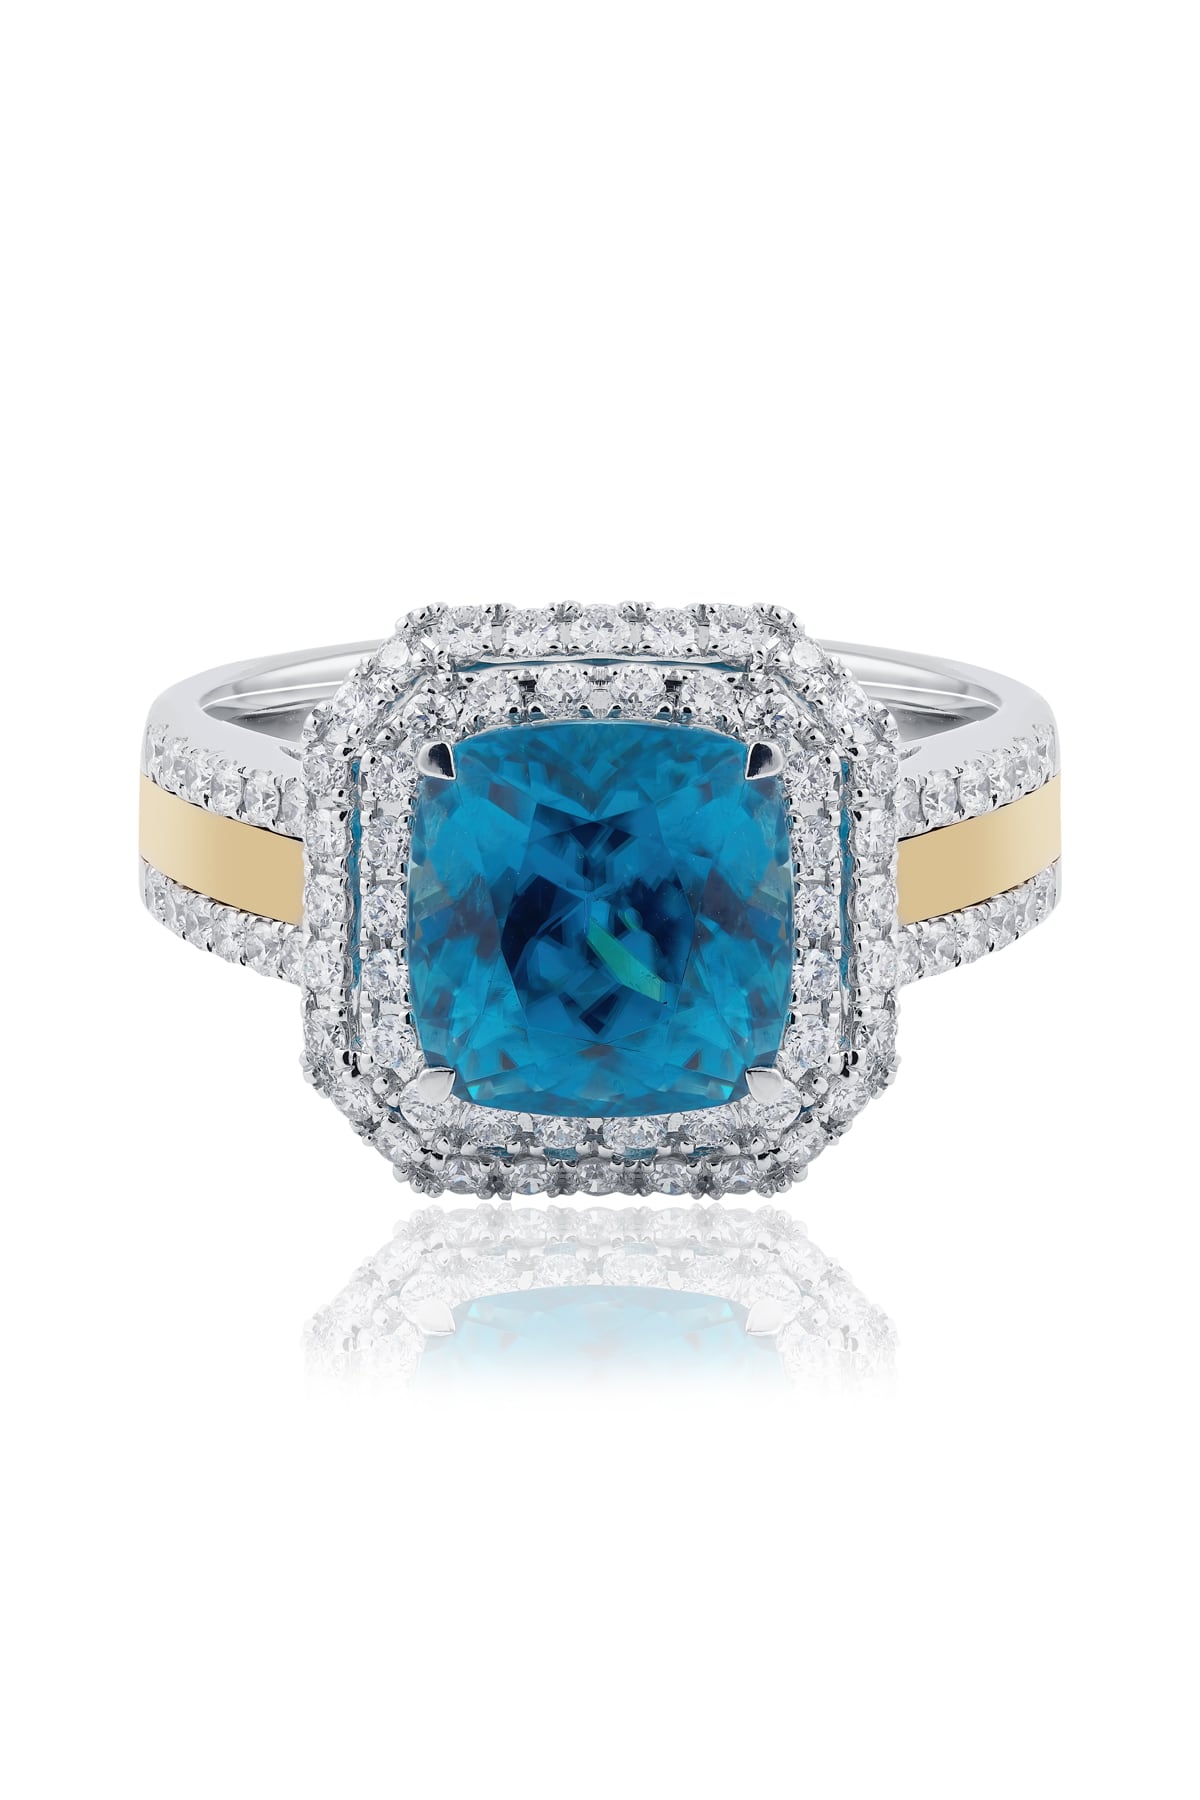 Cushion Cut Natural Blue Zircon Ring With Double Diamond Halo from LeGassick.